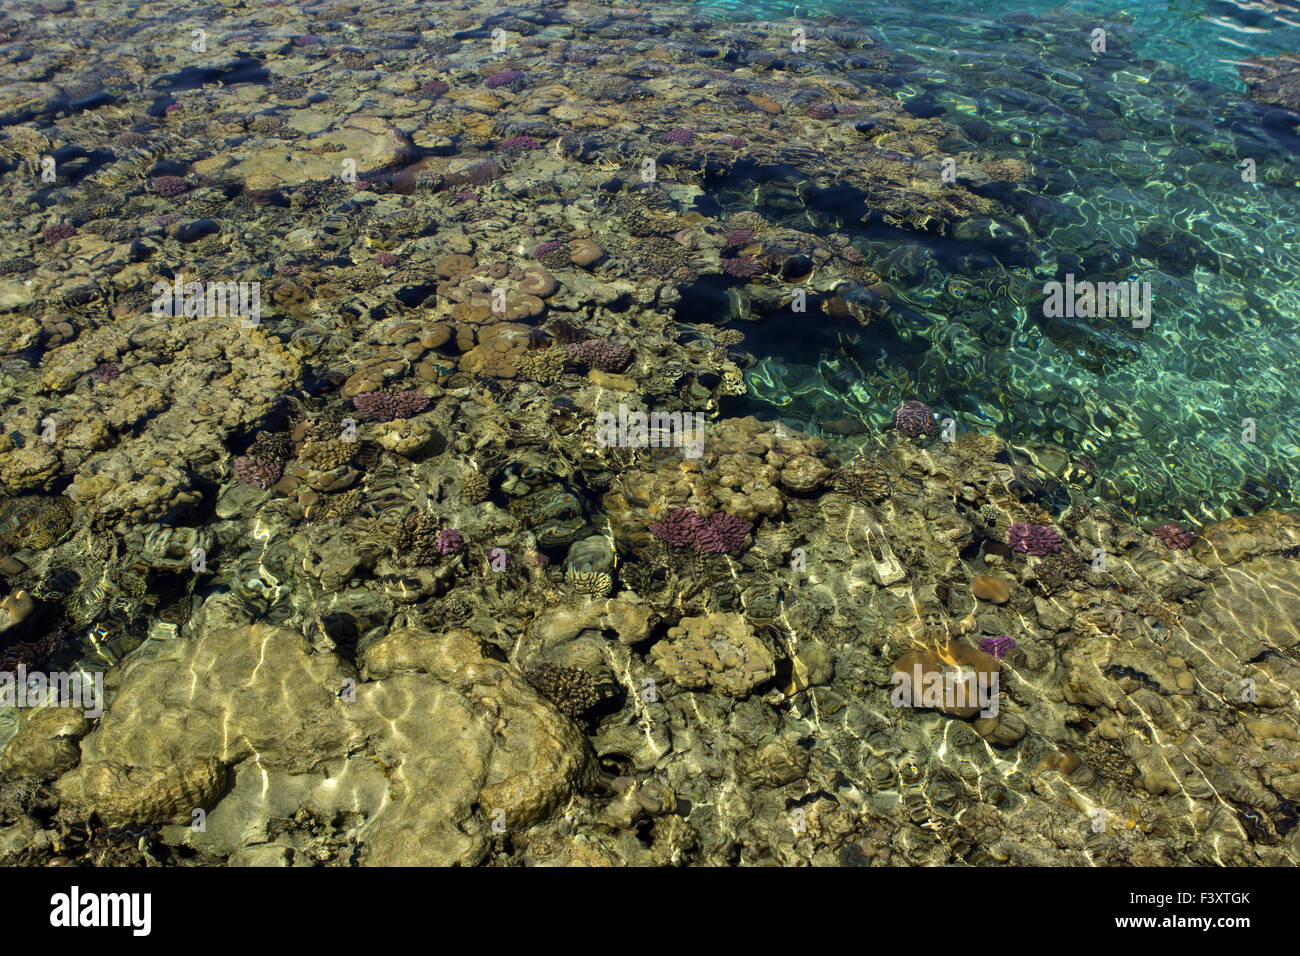 egypt coral reef in the sea, ocean Stock Photo